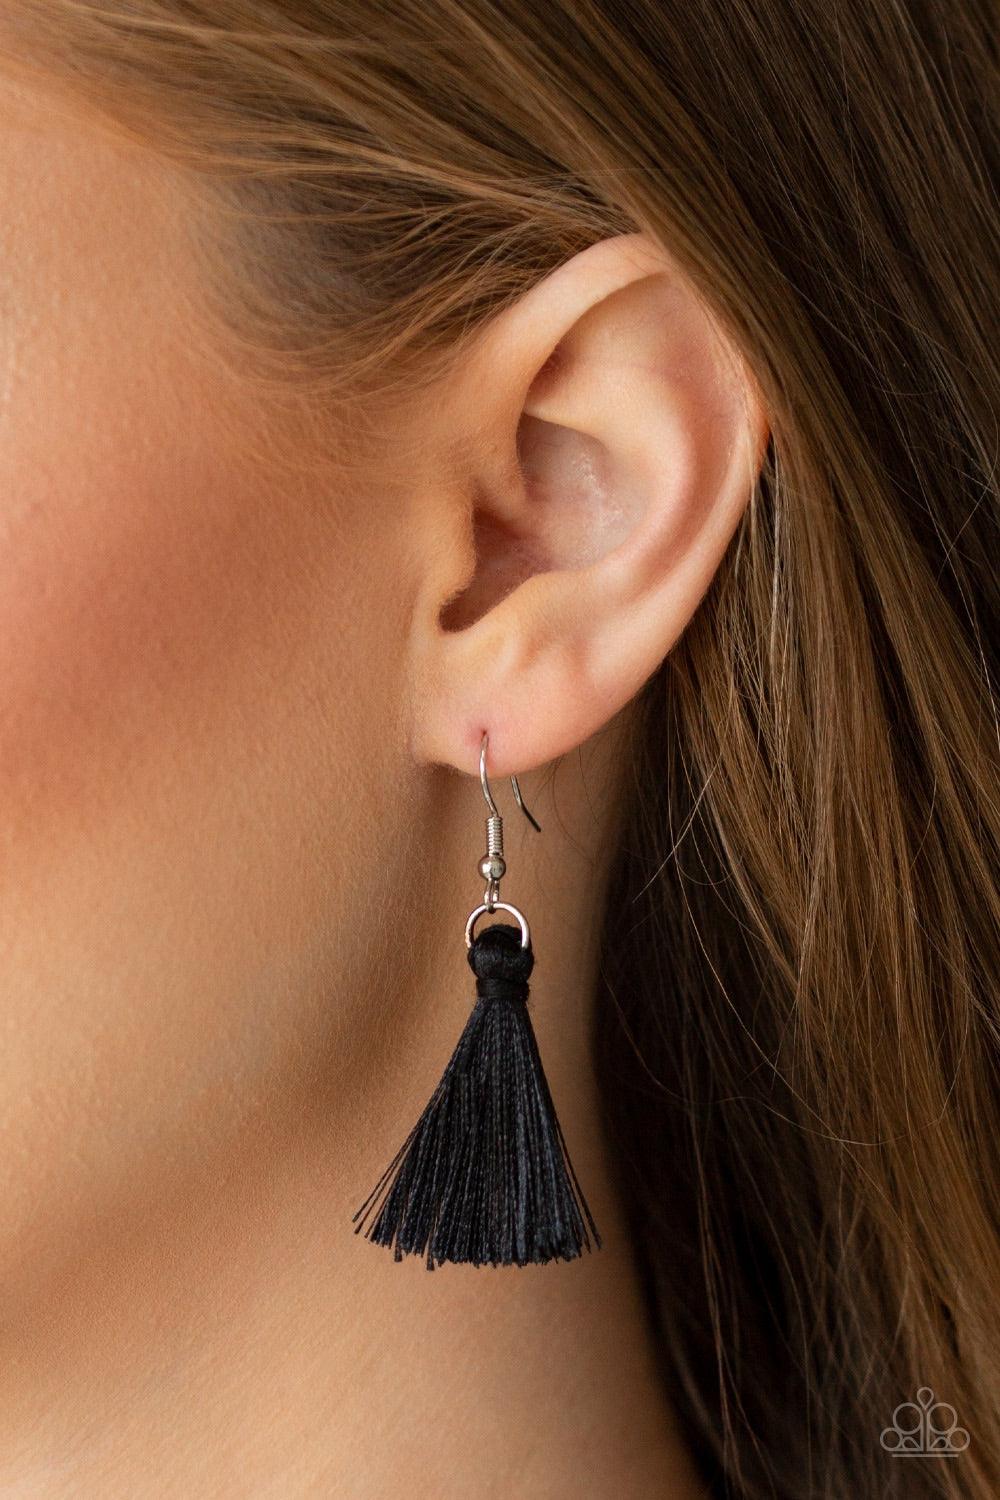 Paparazzi Accessories Triple The Tassel - Black Featuring shimmery black thread, a 3-tiered tassel swings from the bottom of a lengthened silver chain for a colorful, wanderlust vibe. Features an adjustable clasp closure. Jewelry